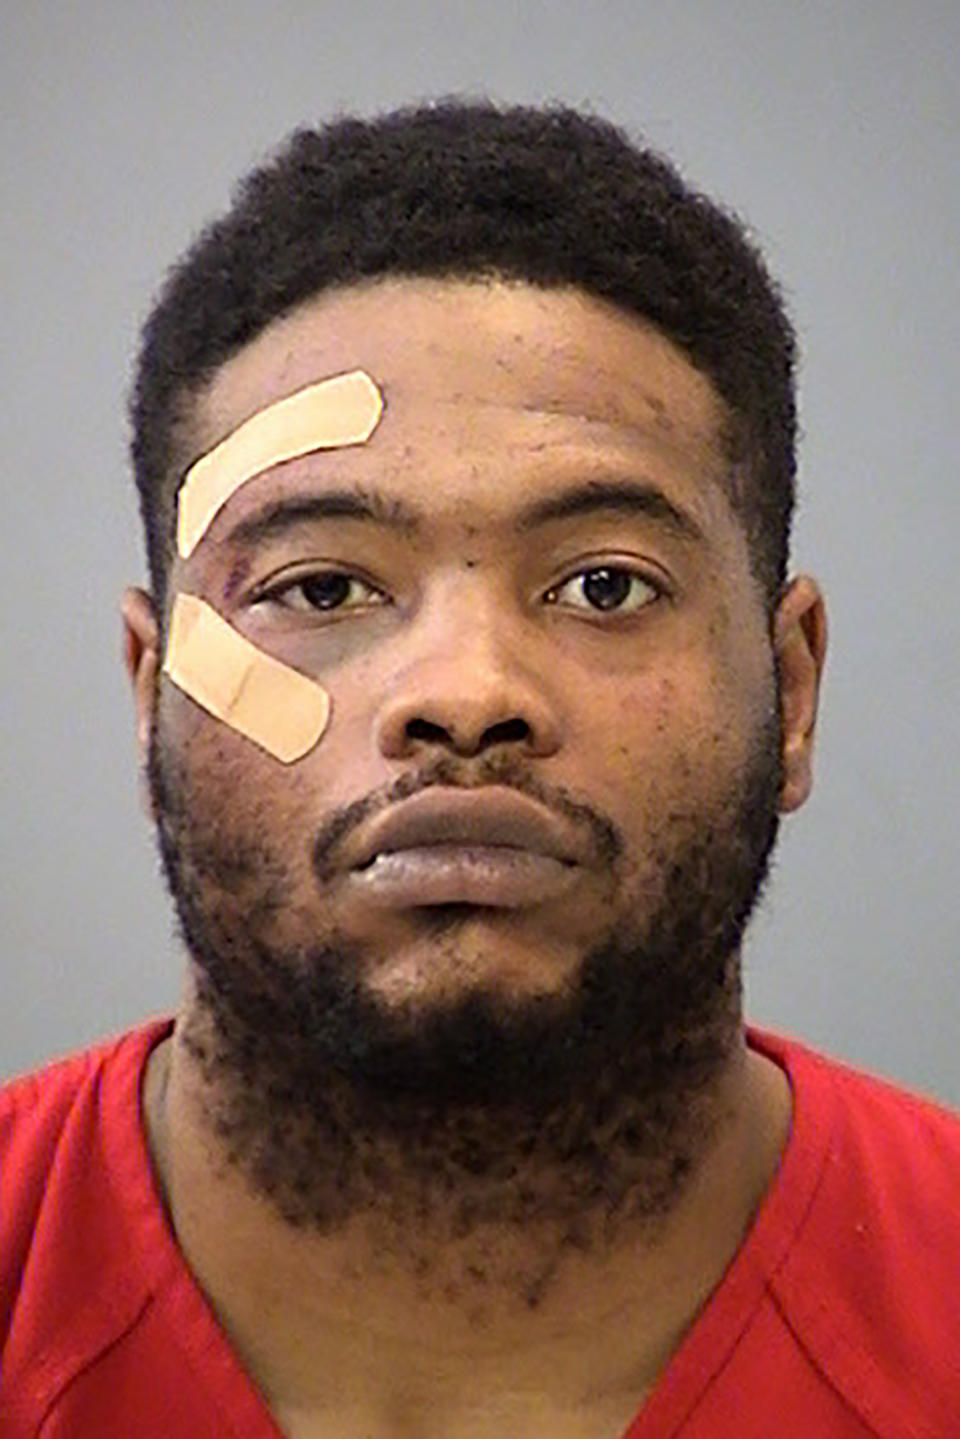 FILE - This undated photo provided by the Indianapolis Police Department shows Elliahs Dorsey, the man charged with fatally shooting an Indianapolis police officer when she responded to a domestic violence call in 2020. Dorsey will be allowed to seek insanity as a defense as he tries to avoid the death penalty, according to a ruling Friday, June 2, 2023. (Indianapolis Police Department via AP, File)